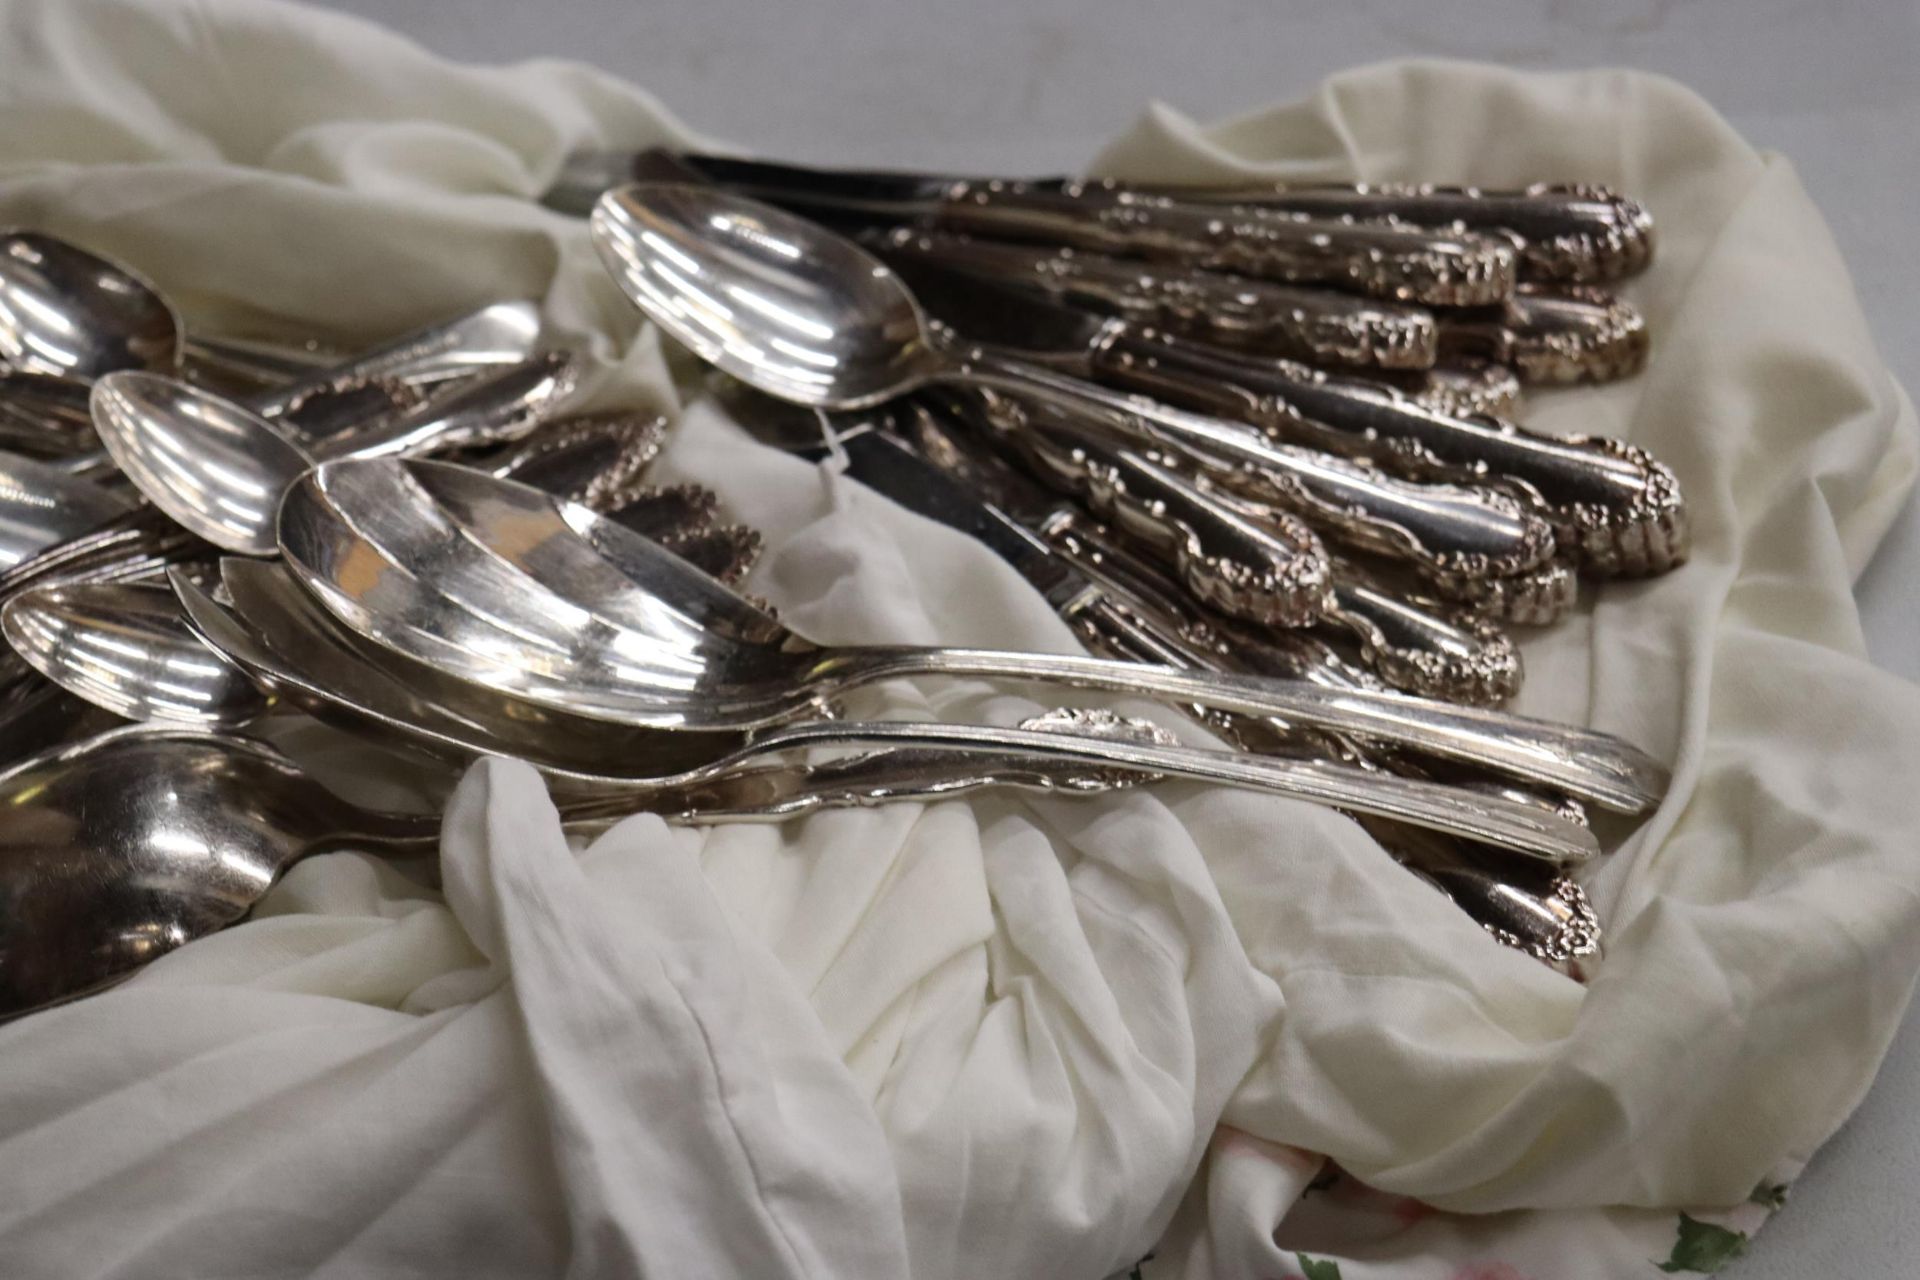 A QUANTITY OF FLATWARE, KNIVES, FORKS AND SPOONS - Image 8 of 9